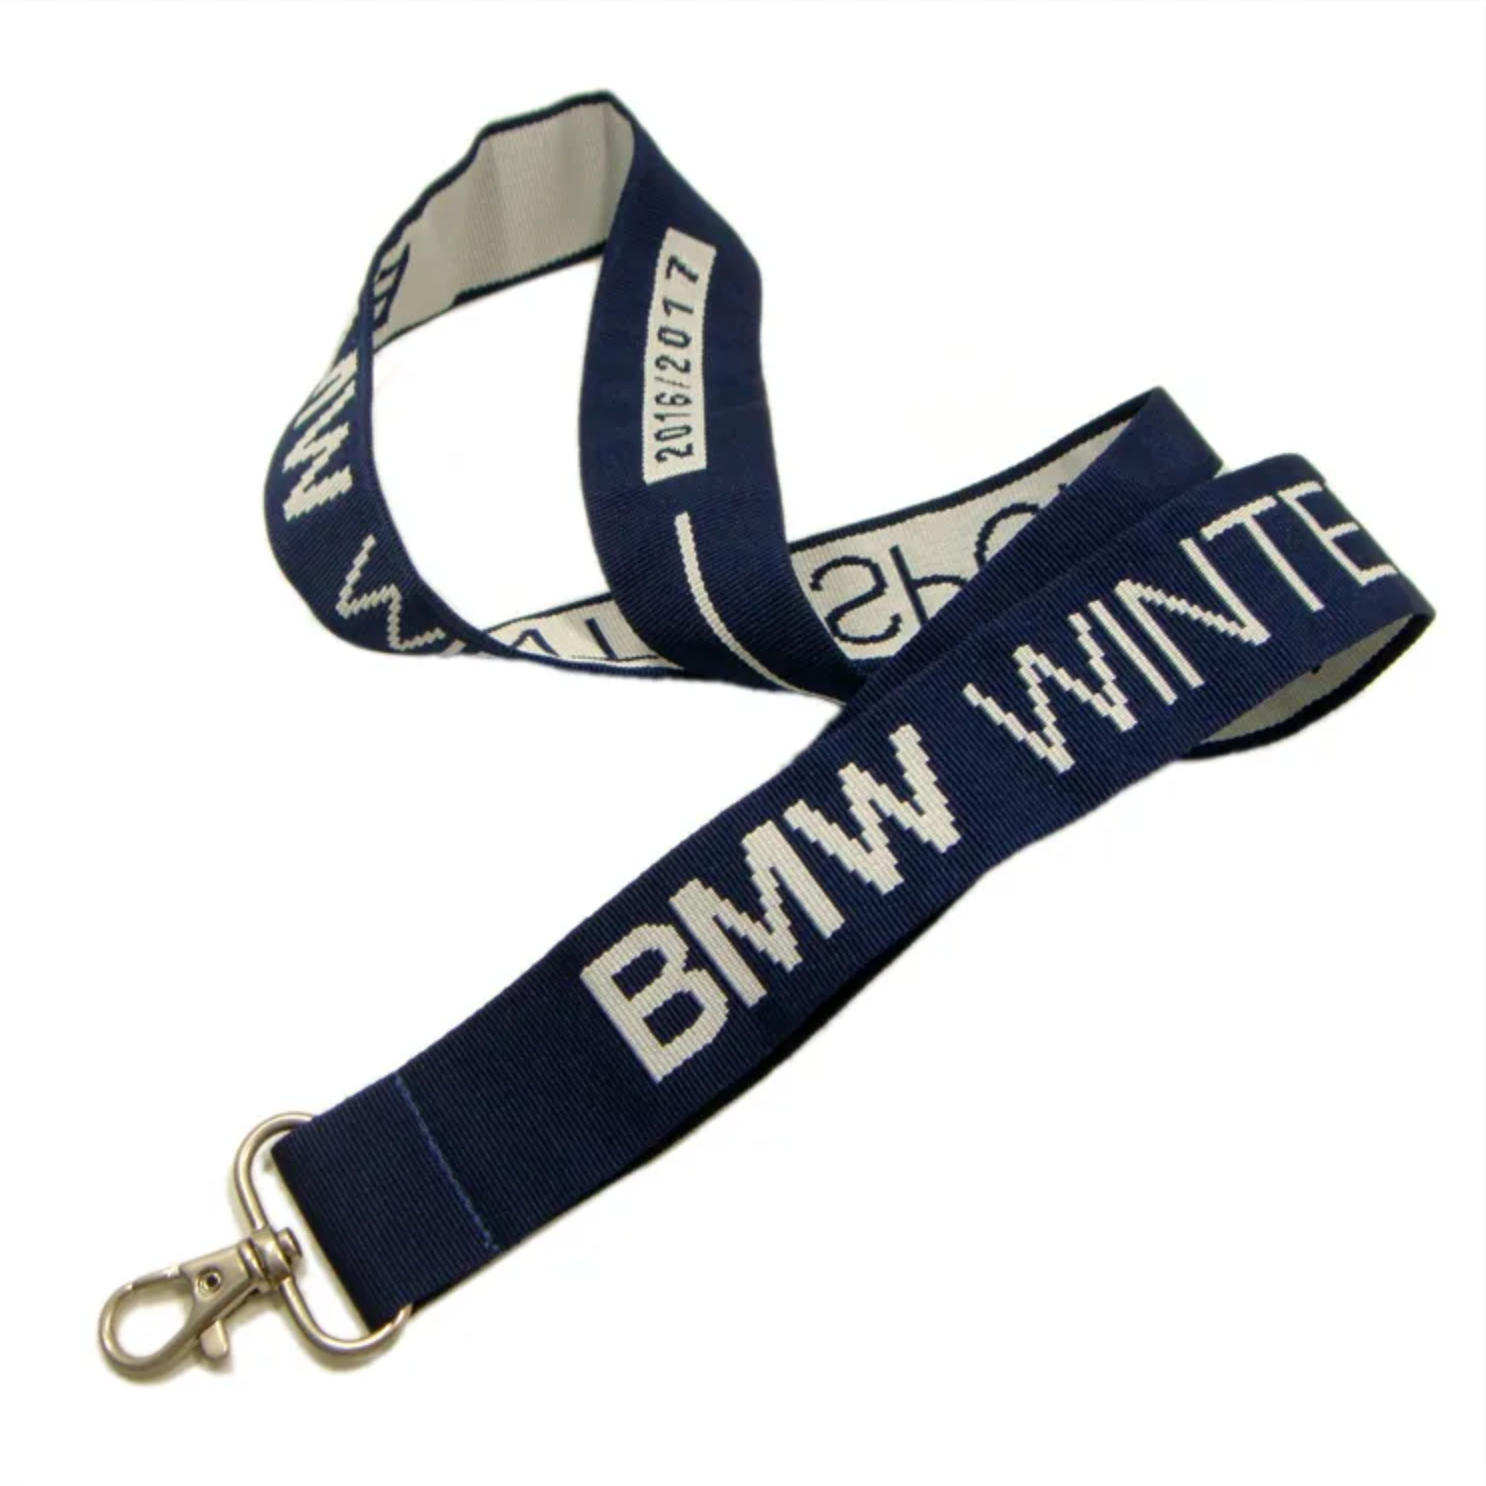 WLYD-BRRR - Woven Lanyard with Buckle Release and Retractable Reel